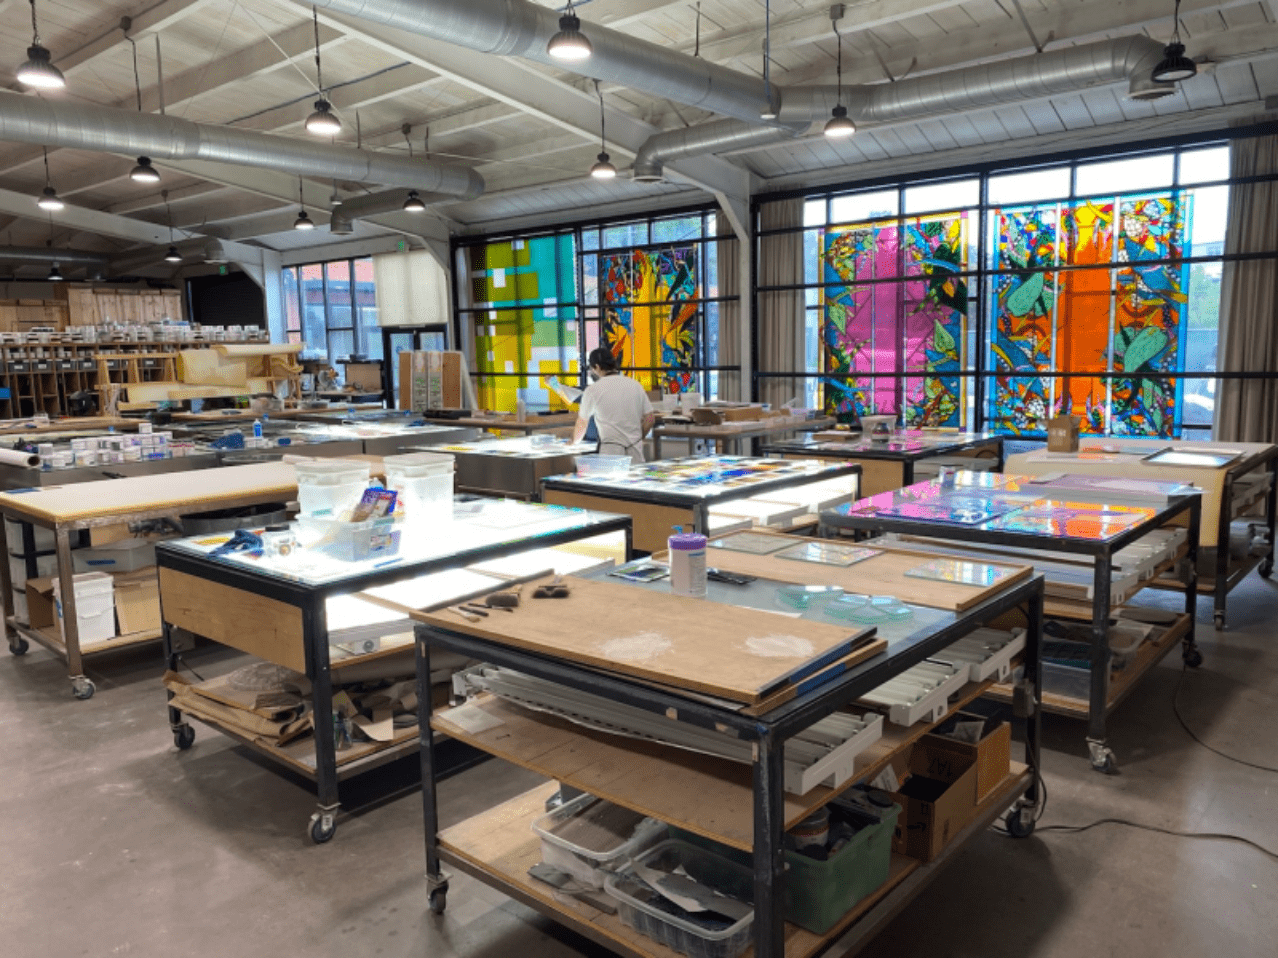 Hyperallergic: The Story Behind One of the Oldest Art Glass Studios in the US